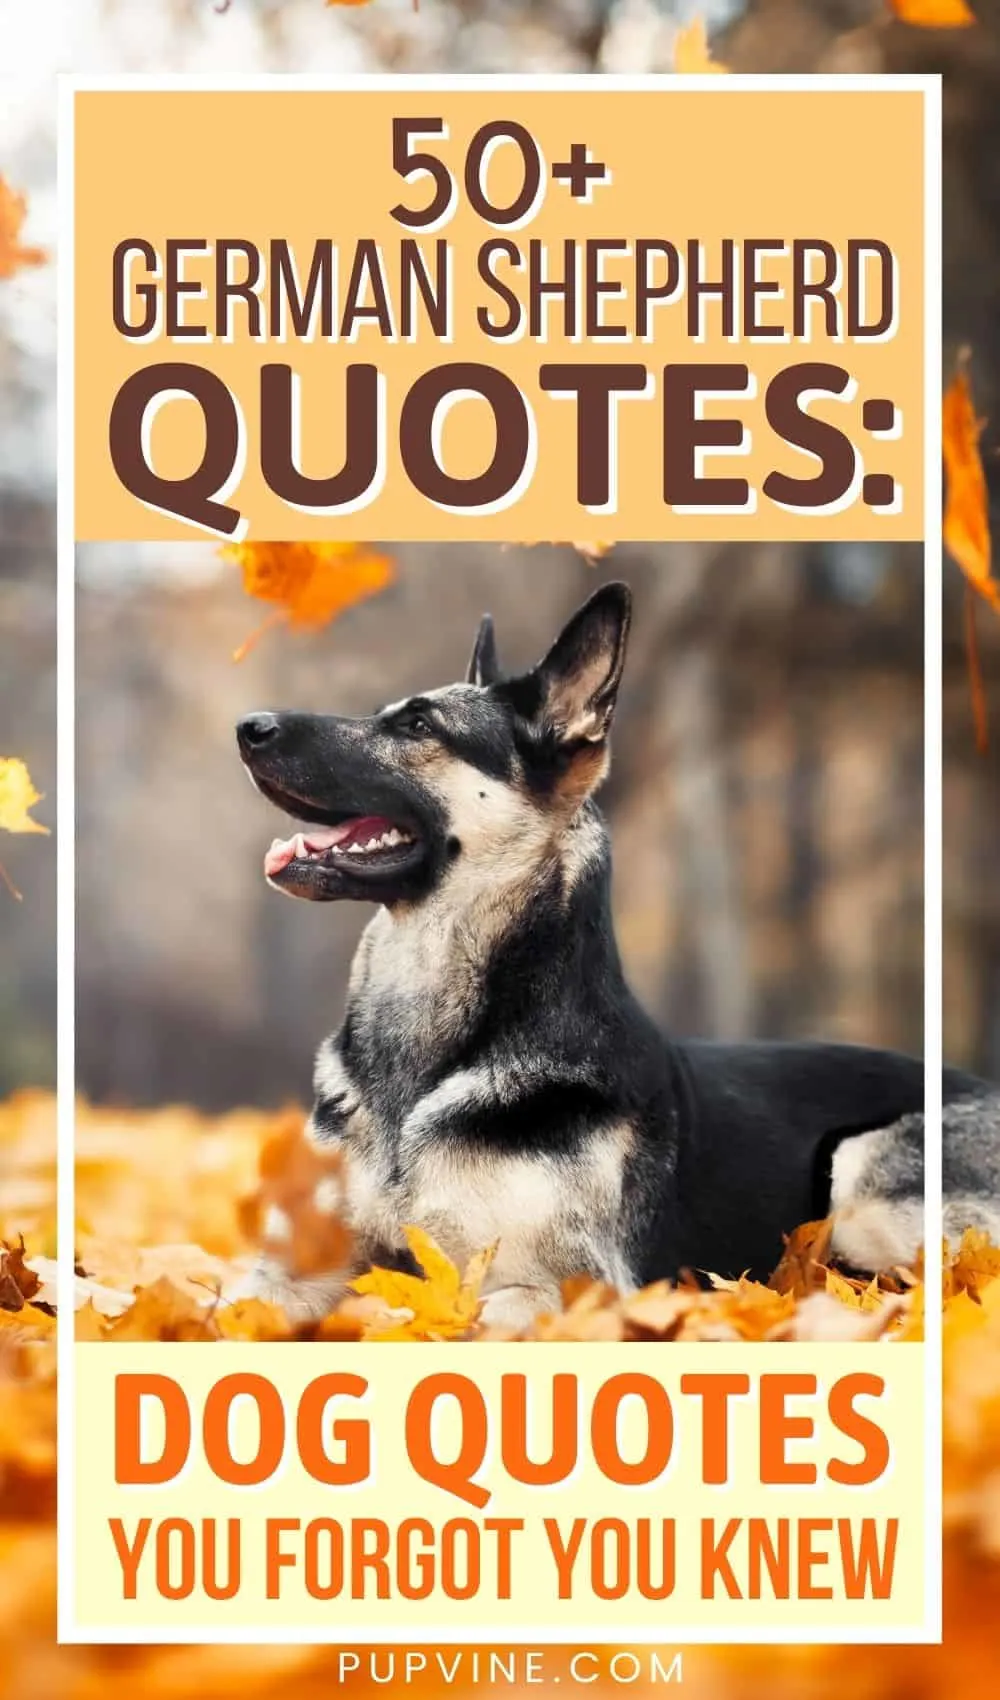 50+ German Shepherd Quotes: Dog Quotes You Forgot You Knew